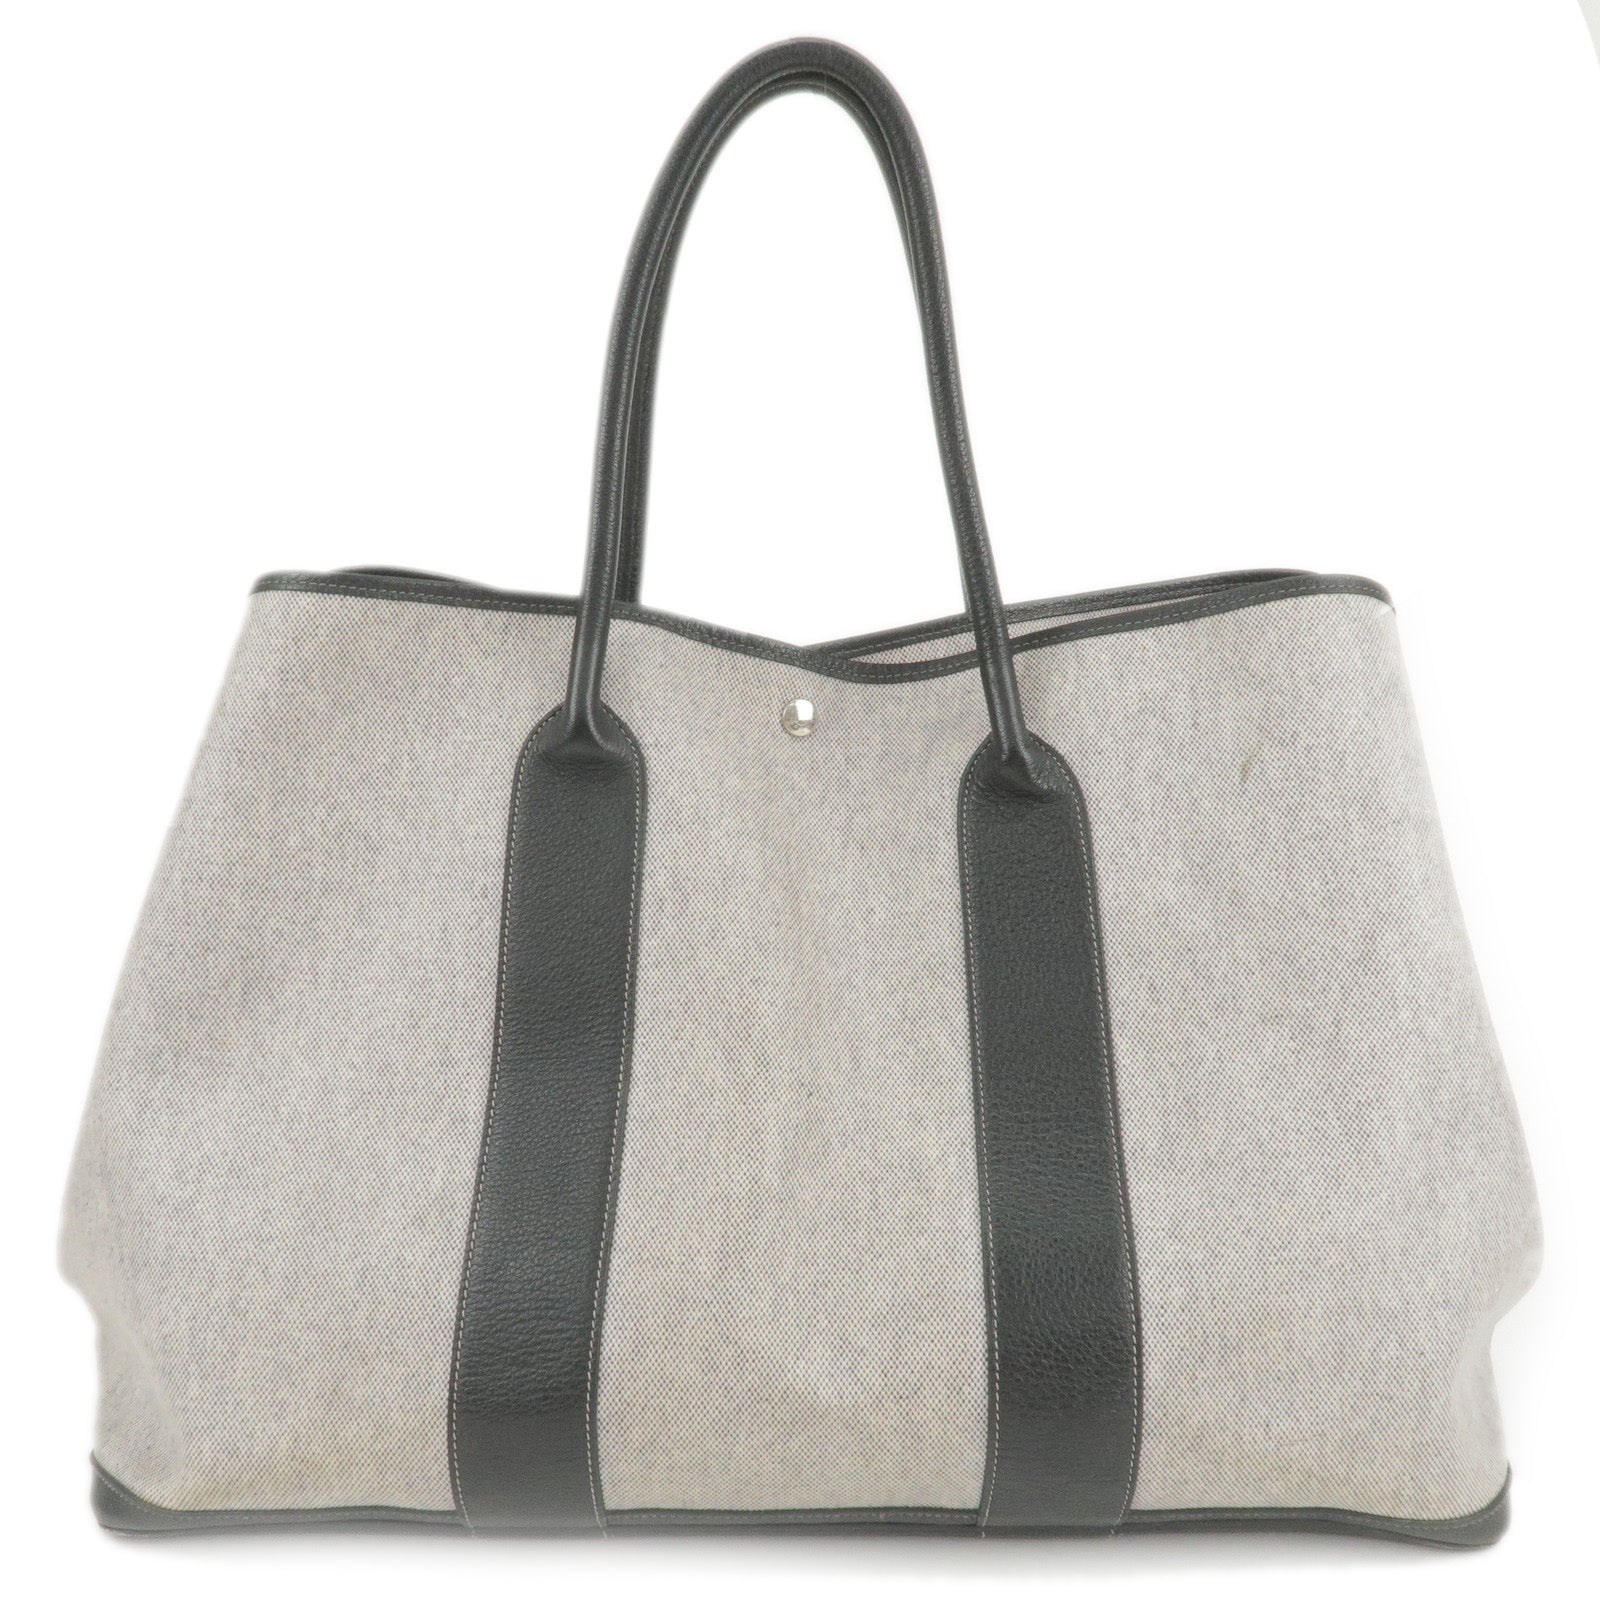 HERMES-Toile-Ash-Leather-Garden-Party-GM-Tote-Bag-Gray-Black